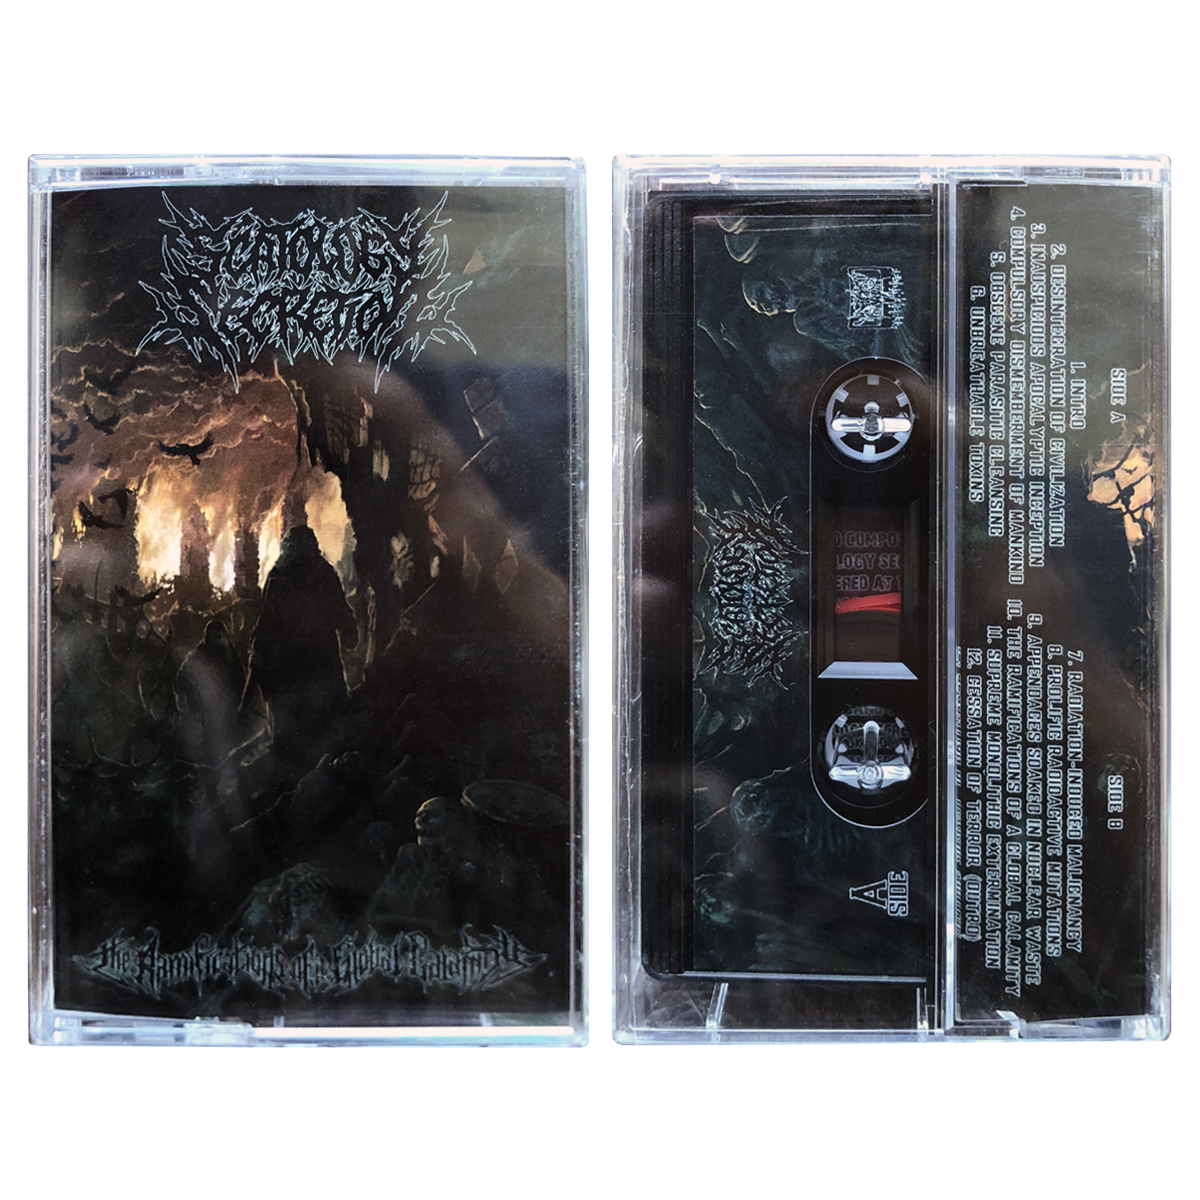 Scatology Secretion 'The Ramifications Of A Global Calamity' Cassette